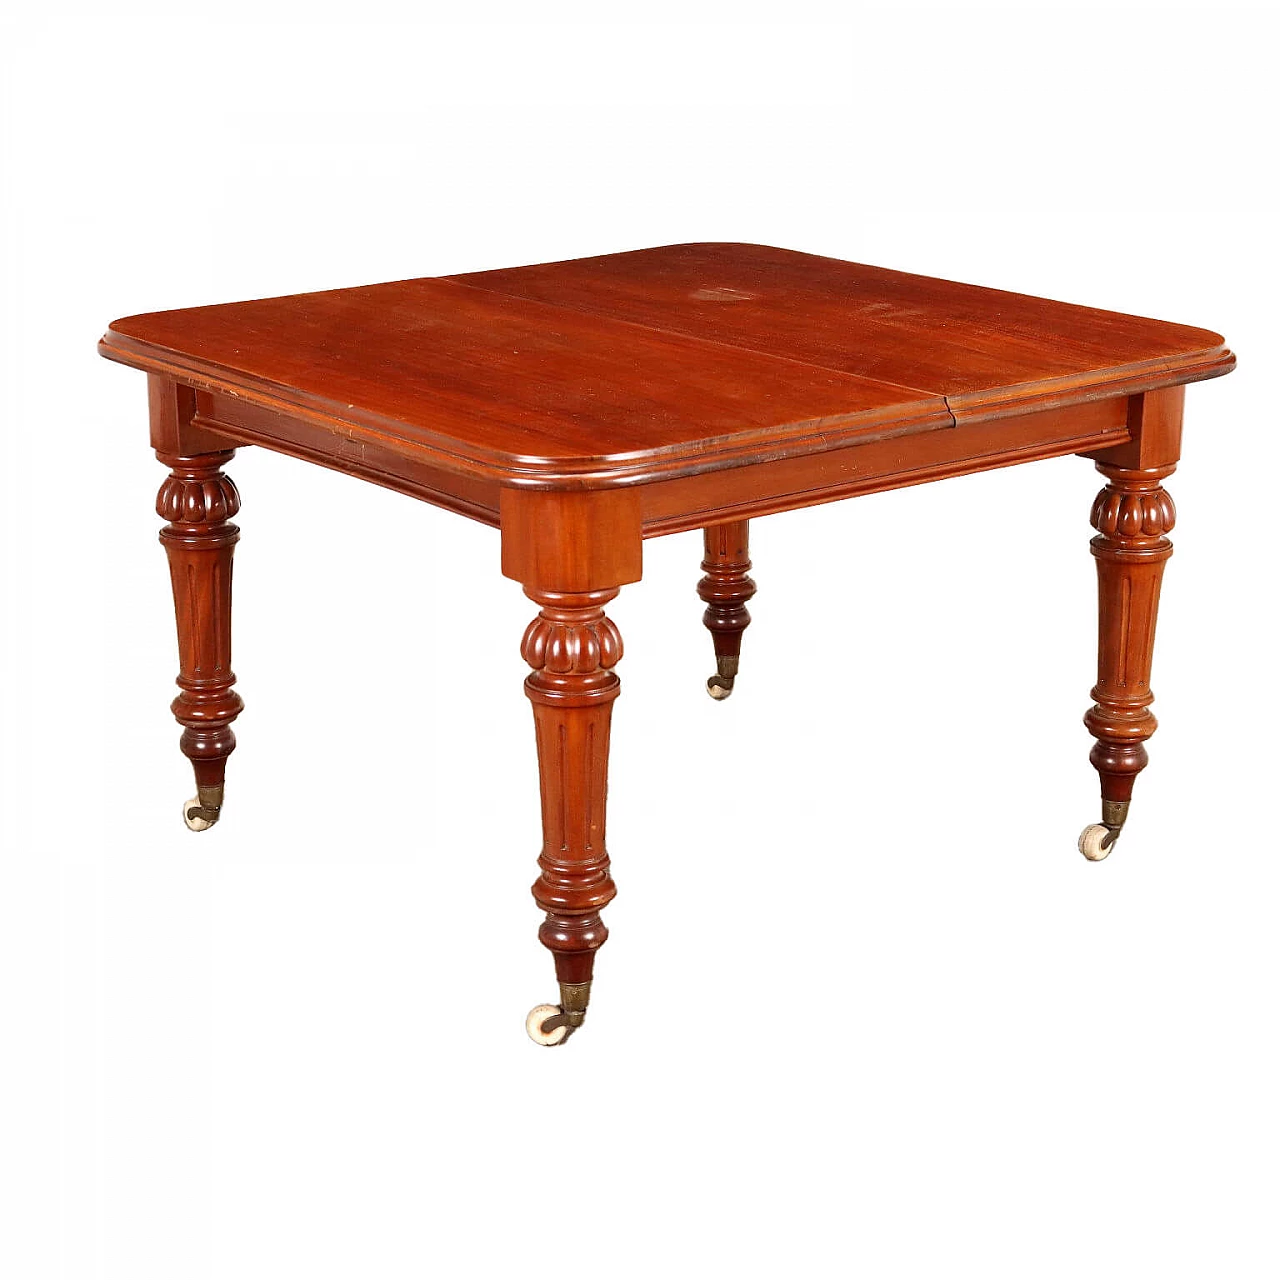 English mahogany extendable table with casters, mid-19th century 1